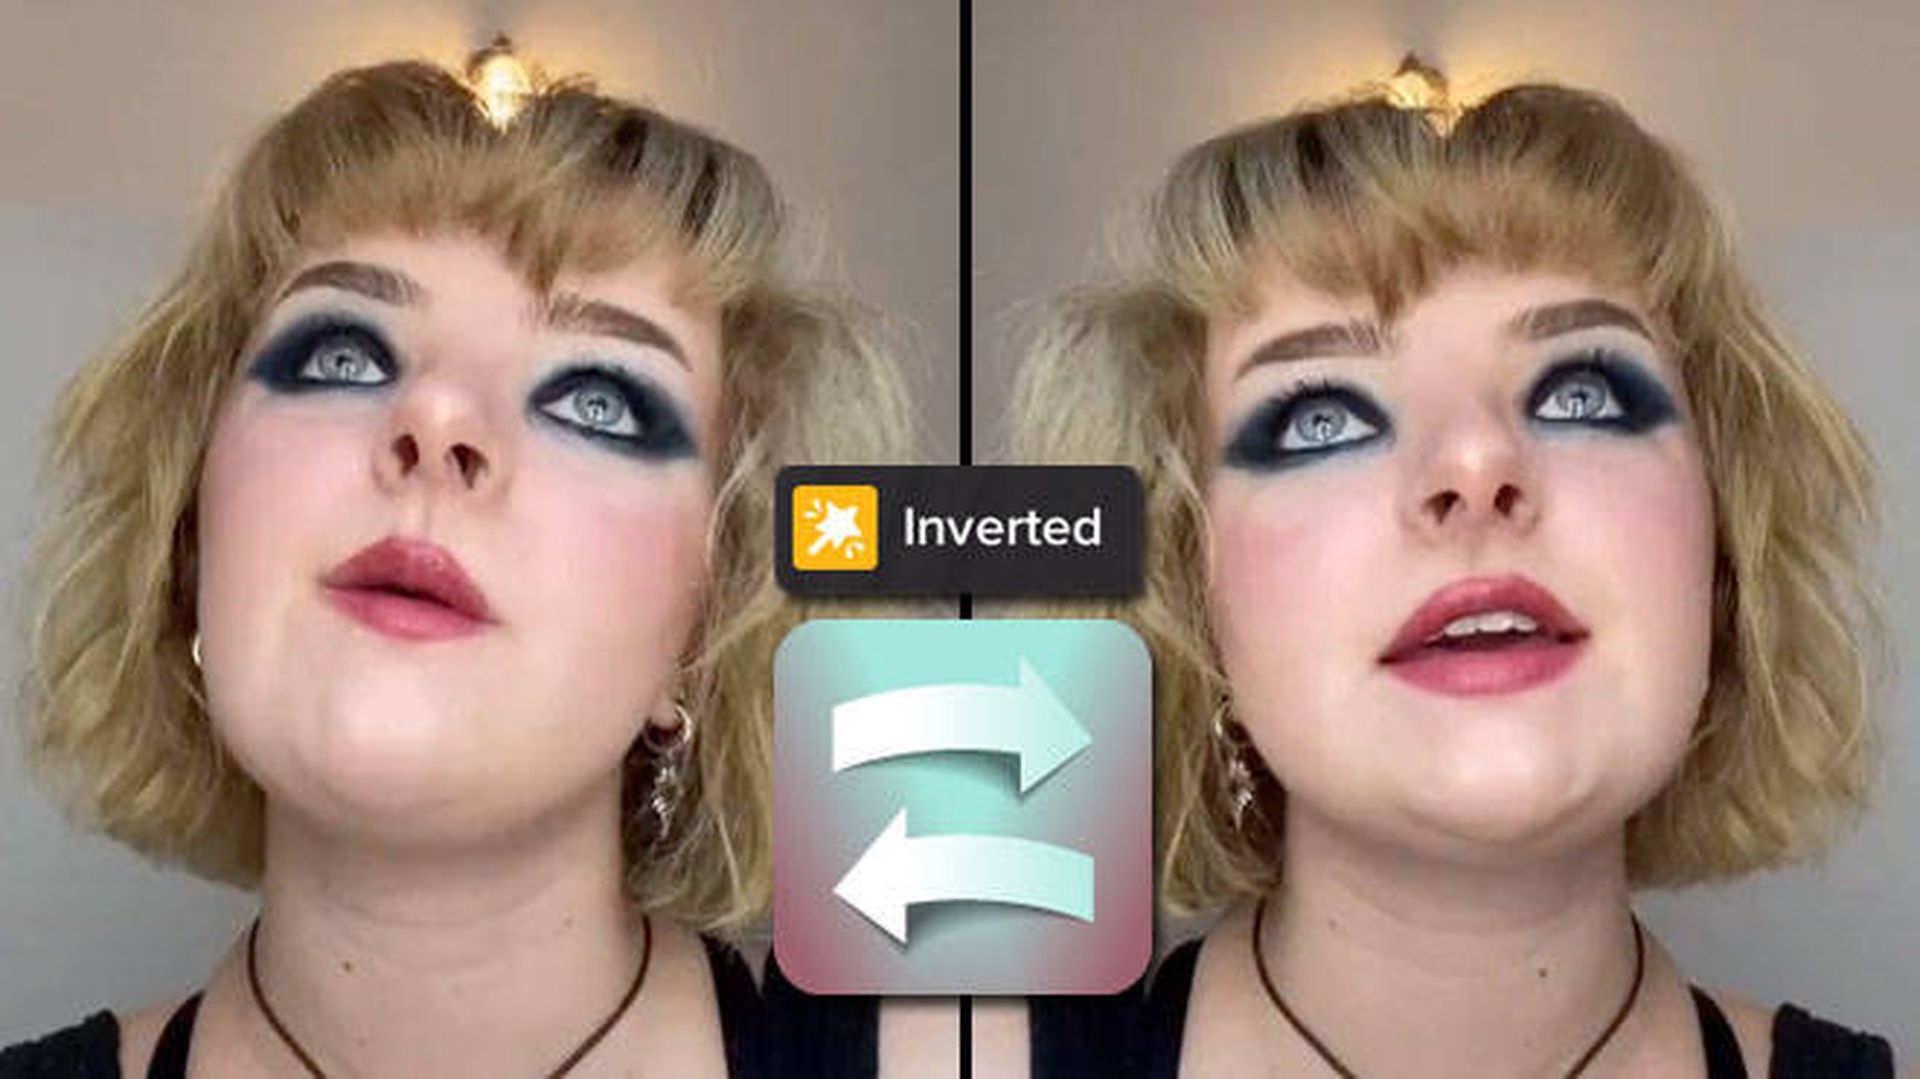 TikTok now has a very interesting filter that mirrors your face, and many are asking: 